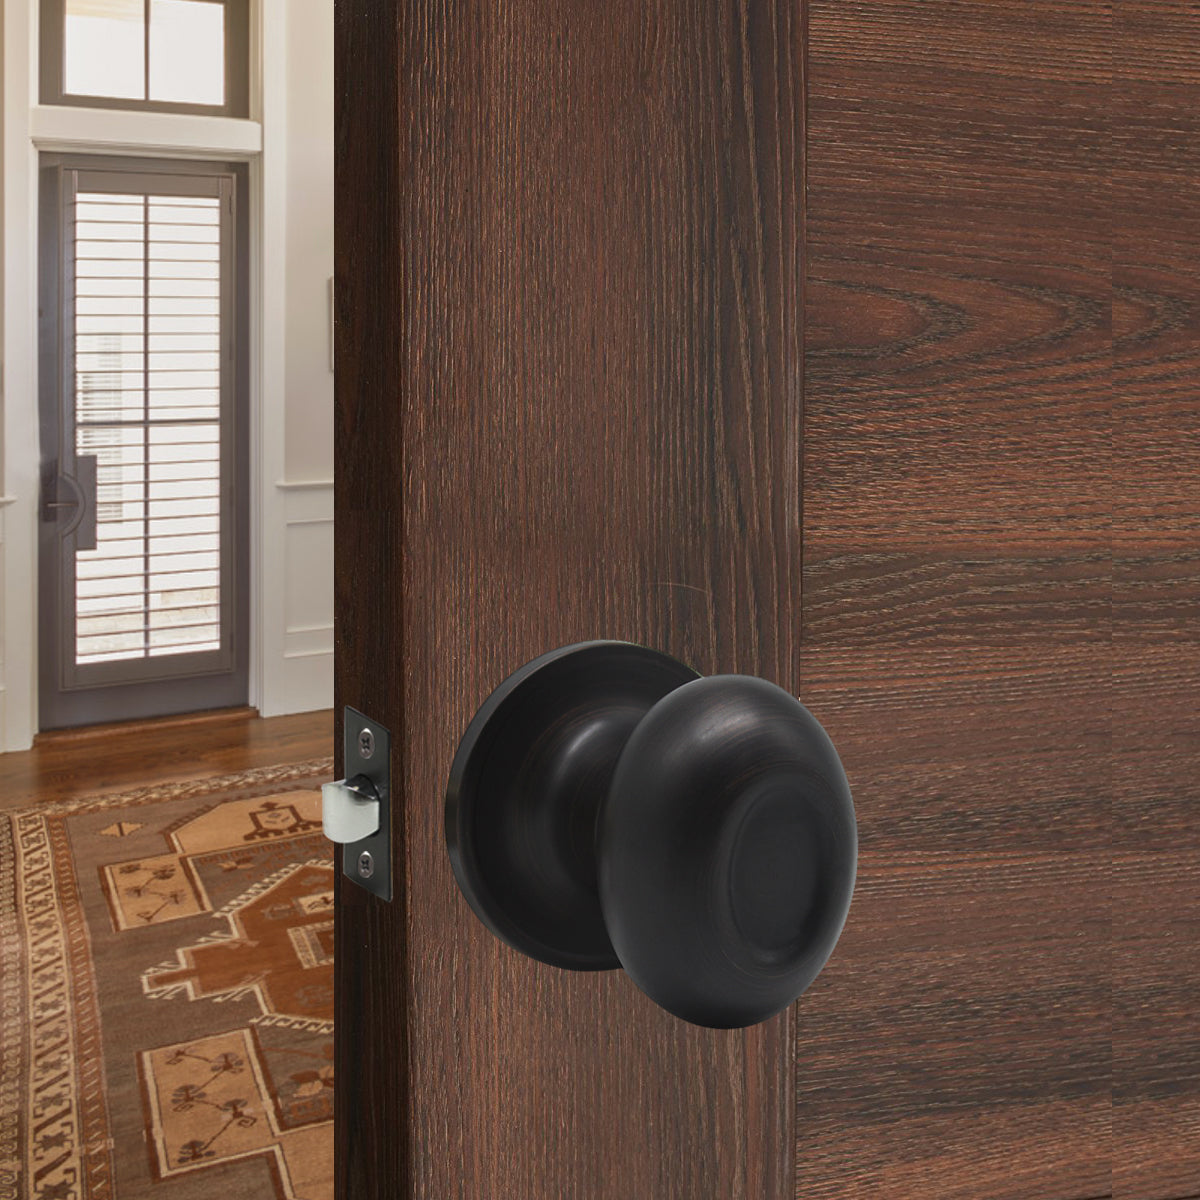 Oval Ball Door Knobs Oil Rubbed Bronze Finish Passage Knobs for Closet -  Probrico